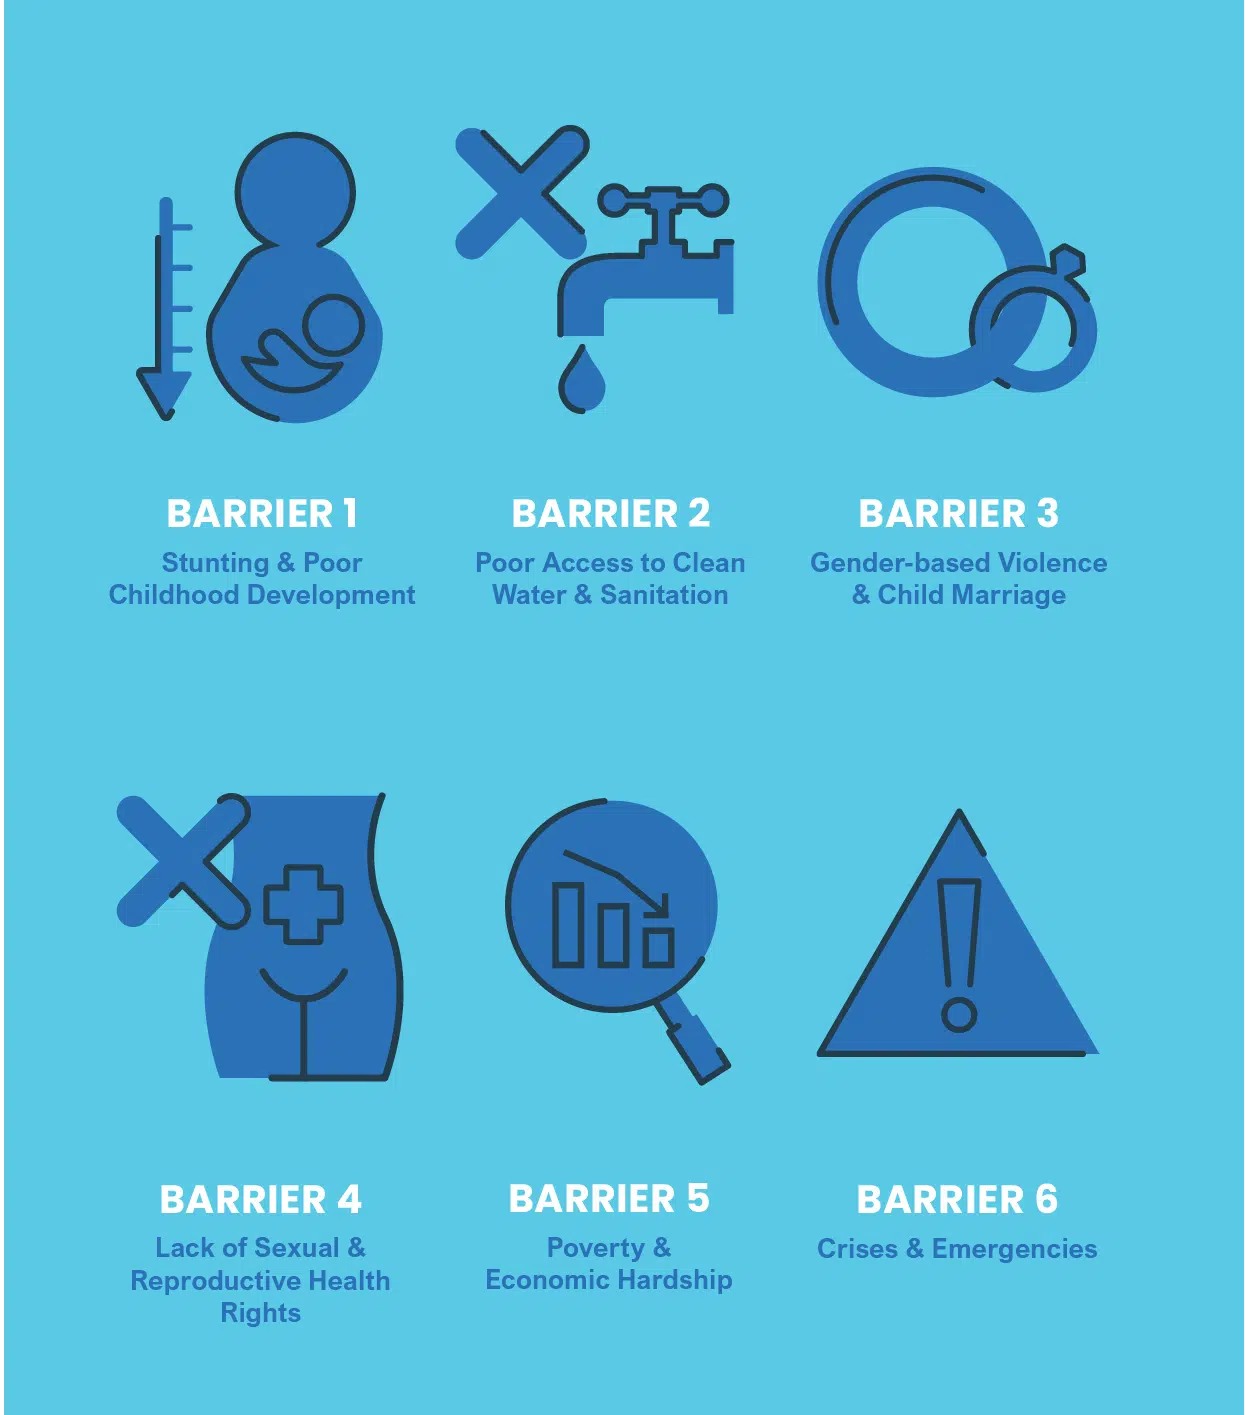 Barrier 1 Stunting and poor childhood development Barrier 2 Poor access to clean water and sanitation Barrier 3 Gender-based violence and child marriage Barrier 4 Lack of sexual and reproductive health rights Barrier 5 Poverty and Economic hardship Barrier 6 Crises and emergencies